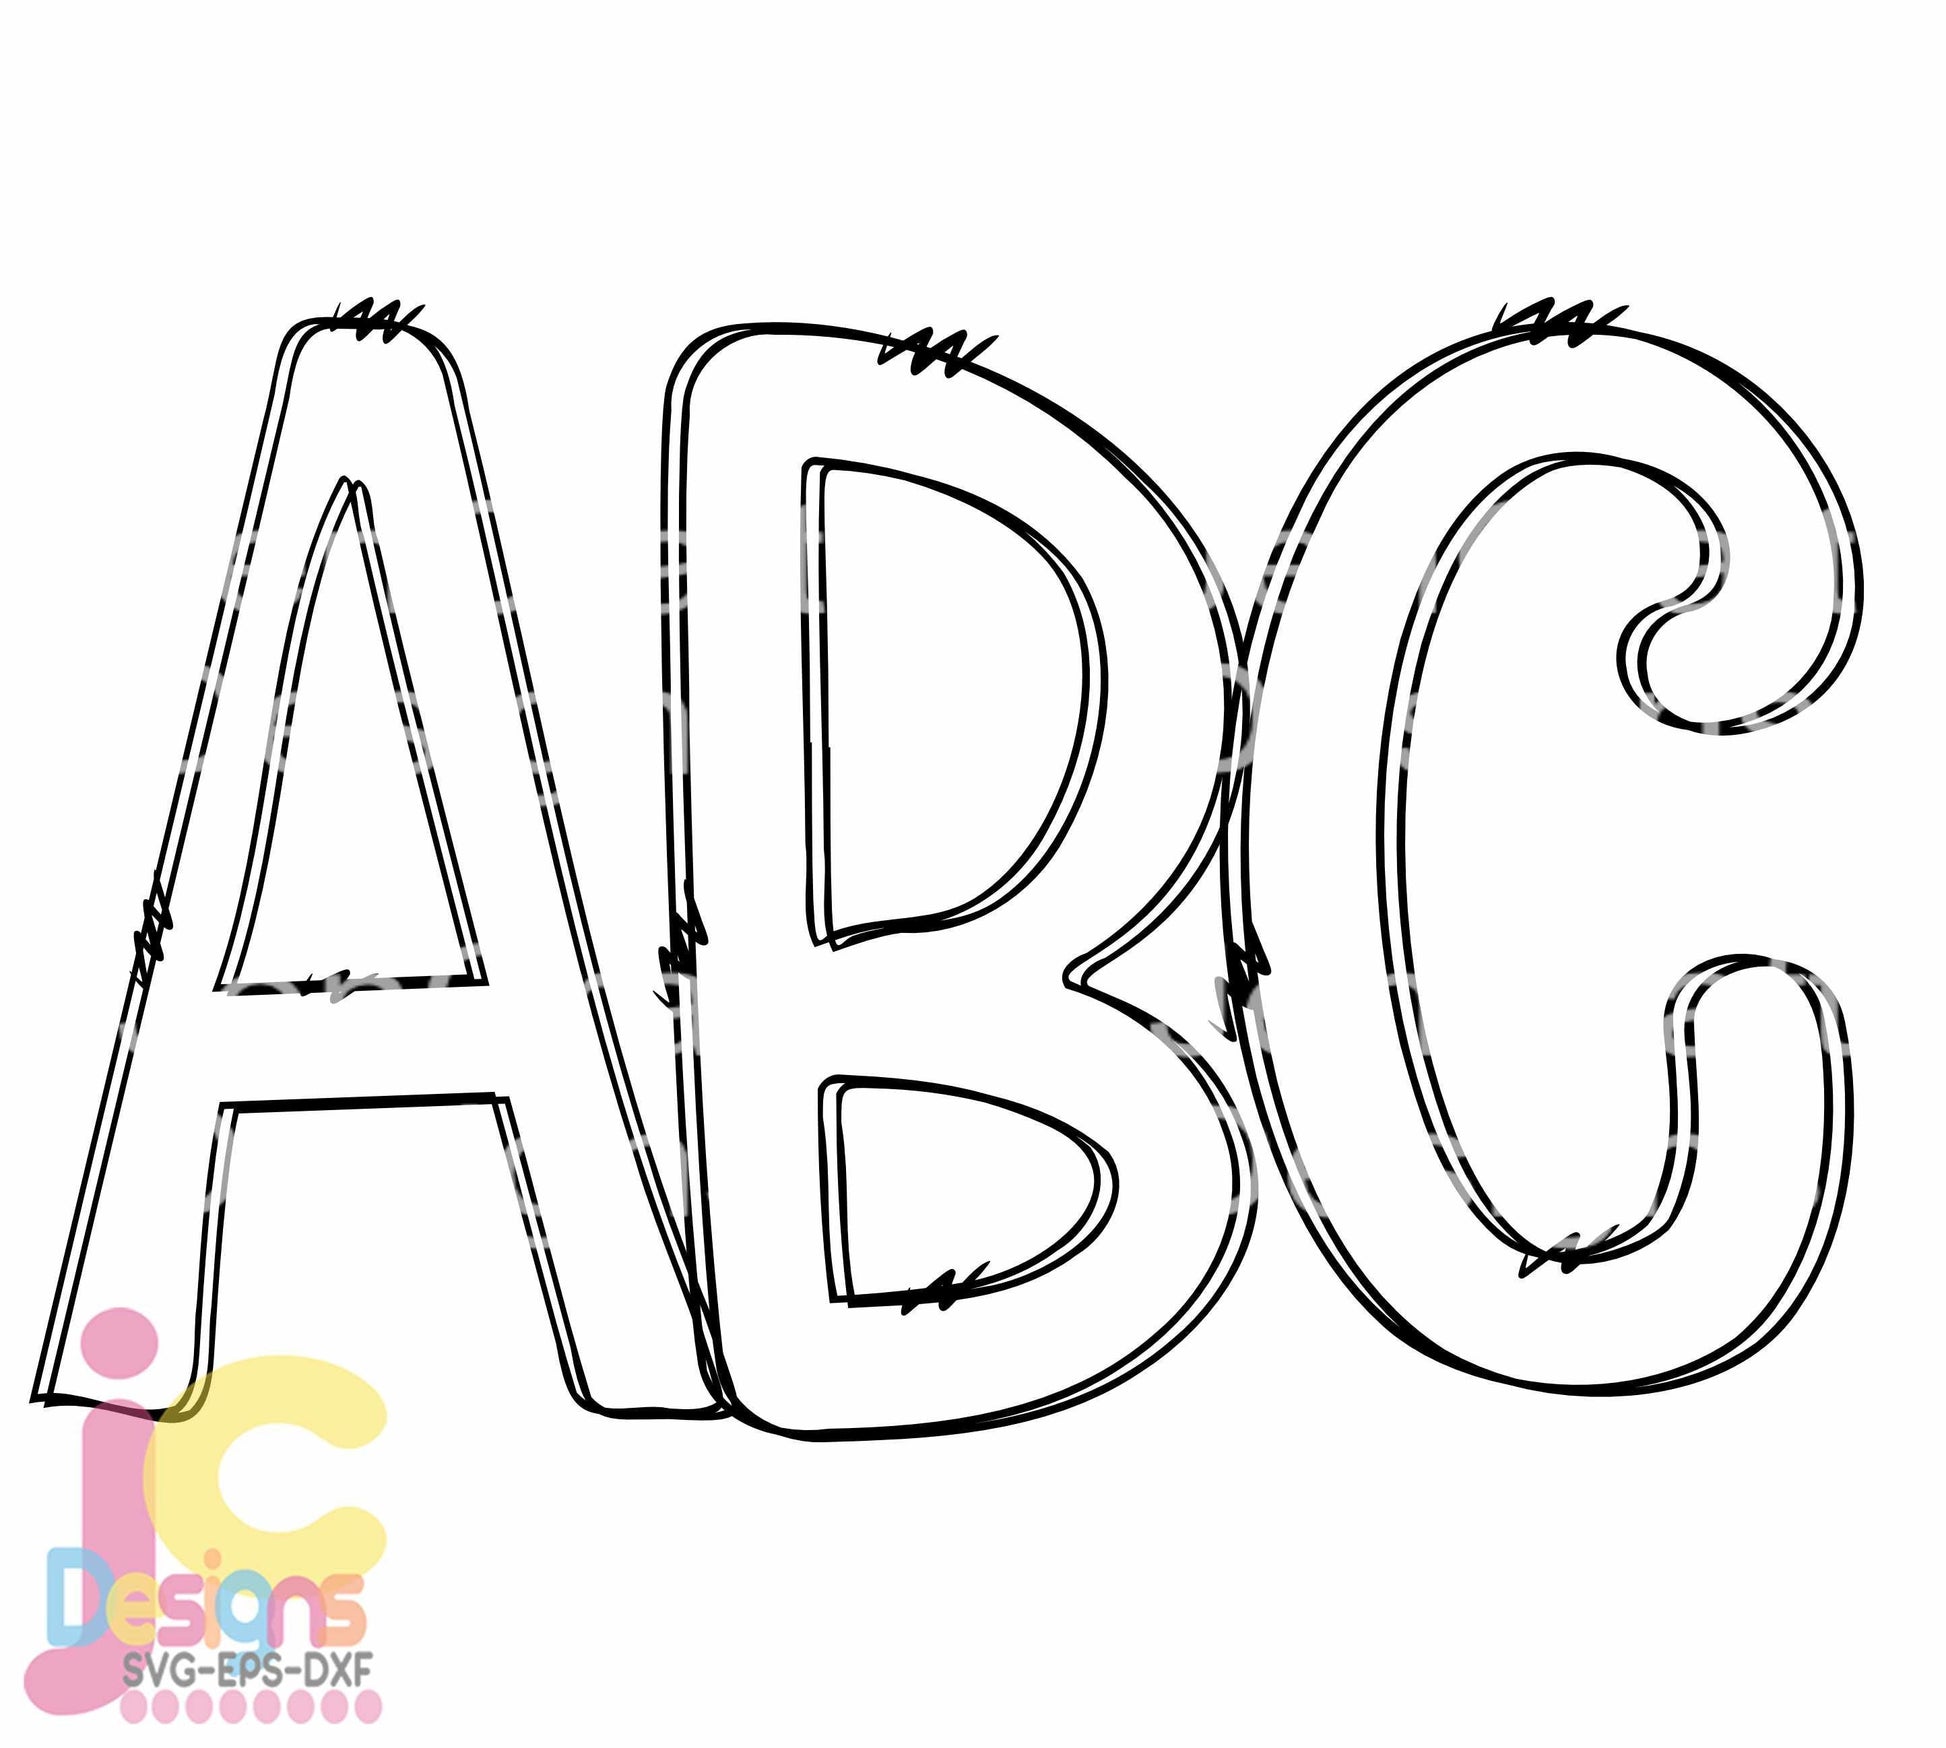 Doodle Letters AlphaBet SVG, EPS, DXF and PNG